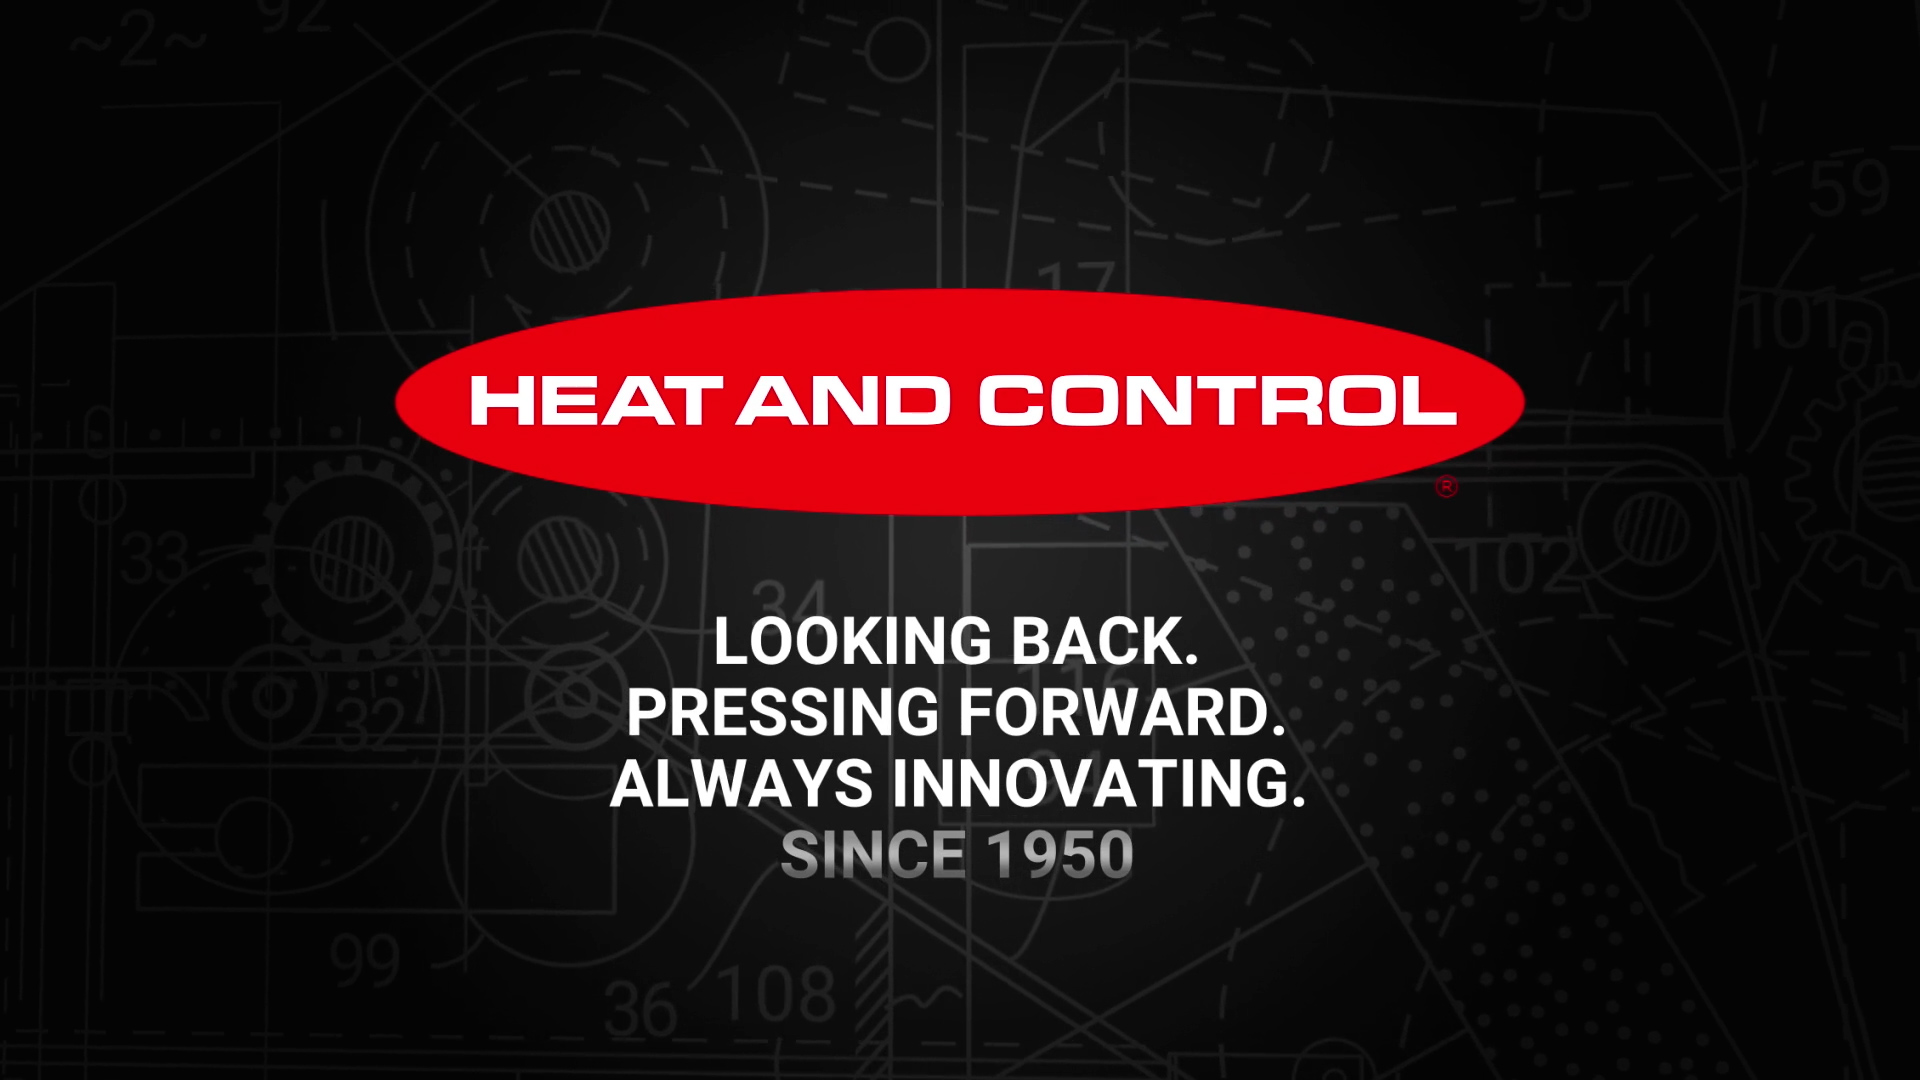 Heat and Control Corporate Video